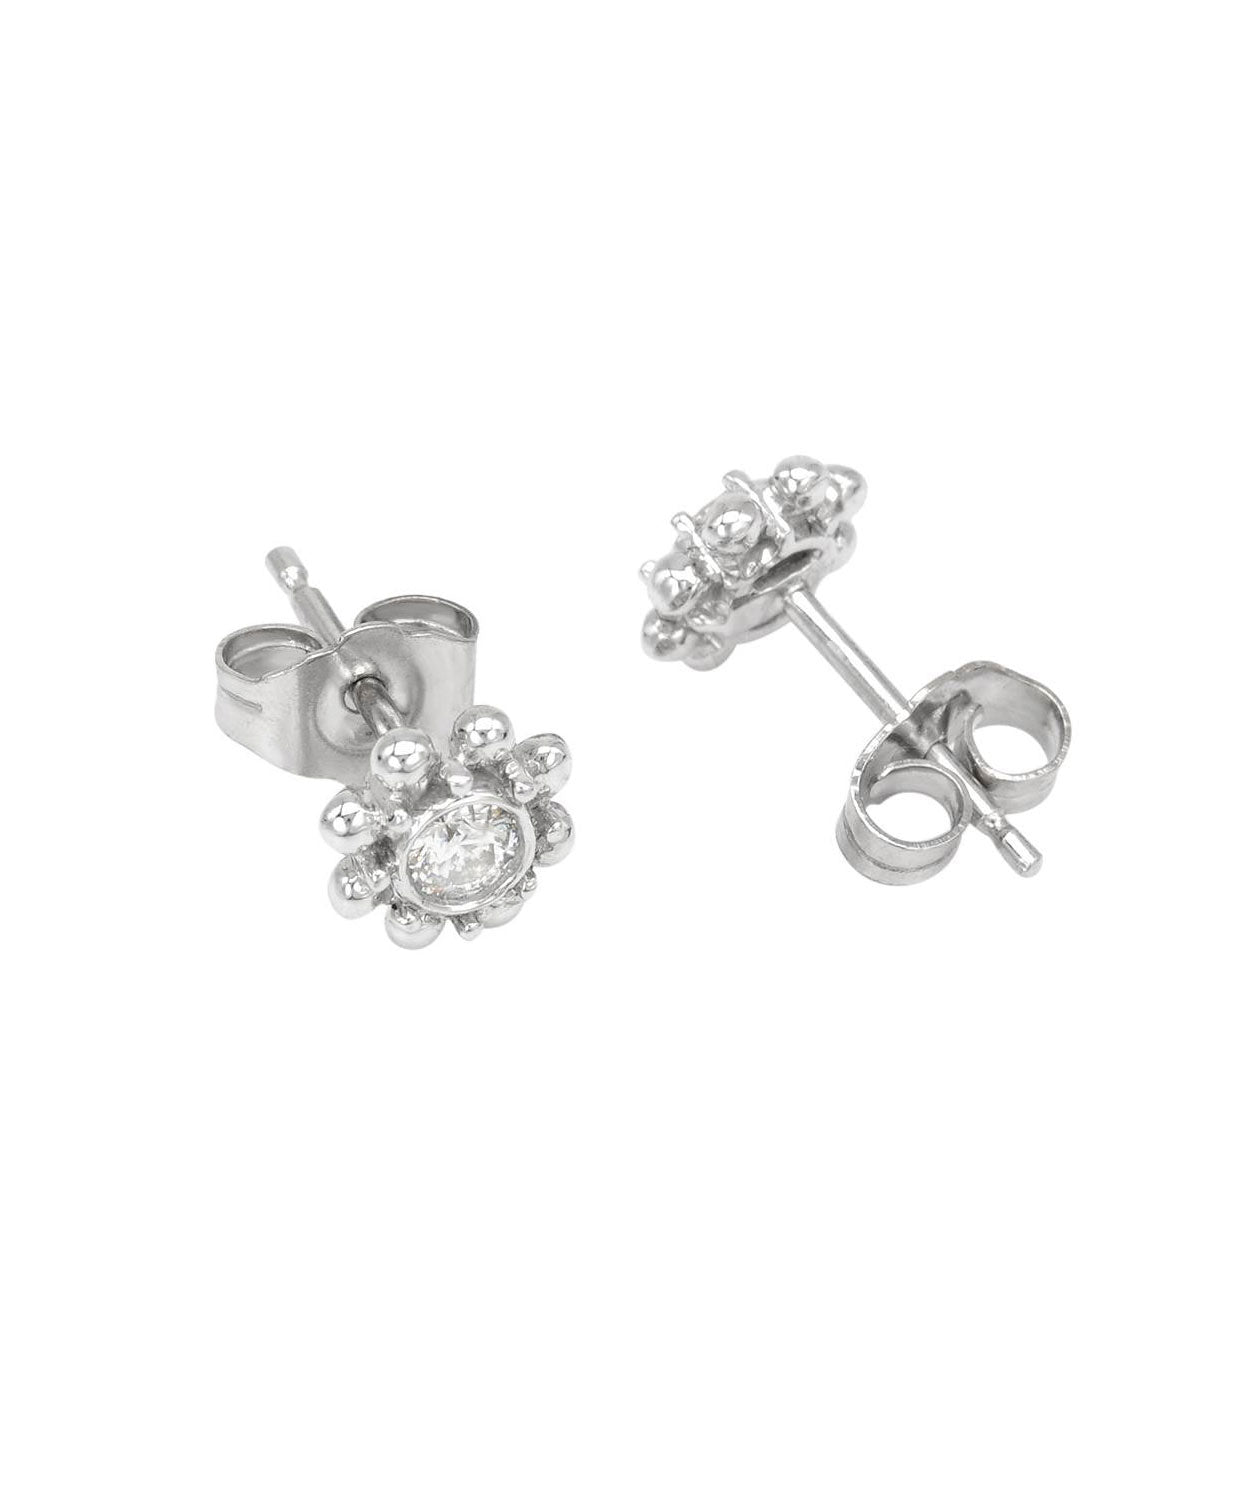 Signature Collection 0.20 ctw Diamond 14k White Gold Dainty Stud Earrings View 2